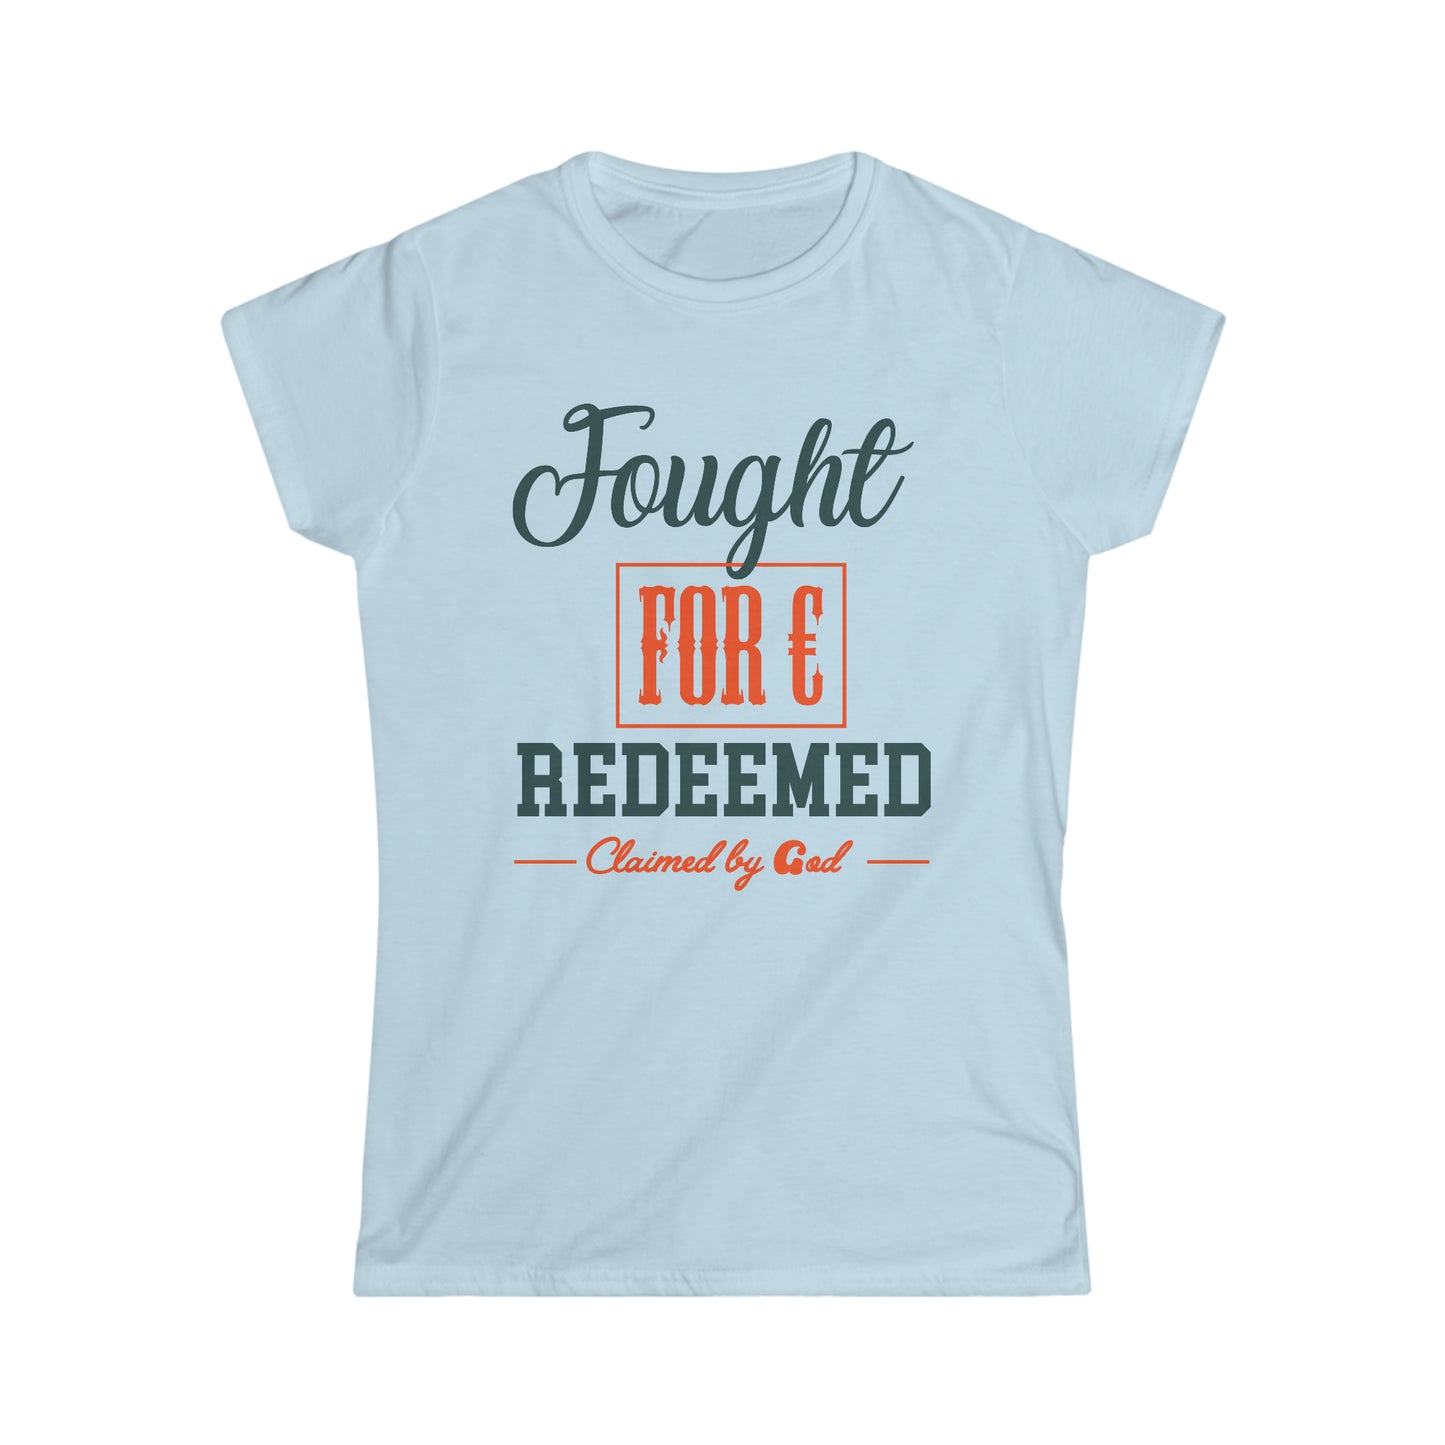 Fought for and redeemed Women's T-shirt